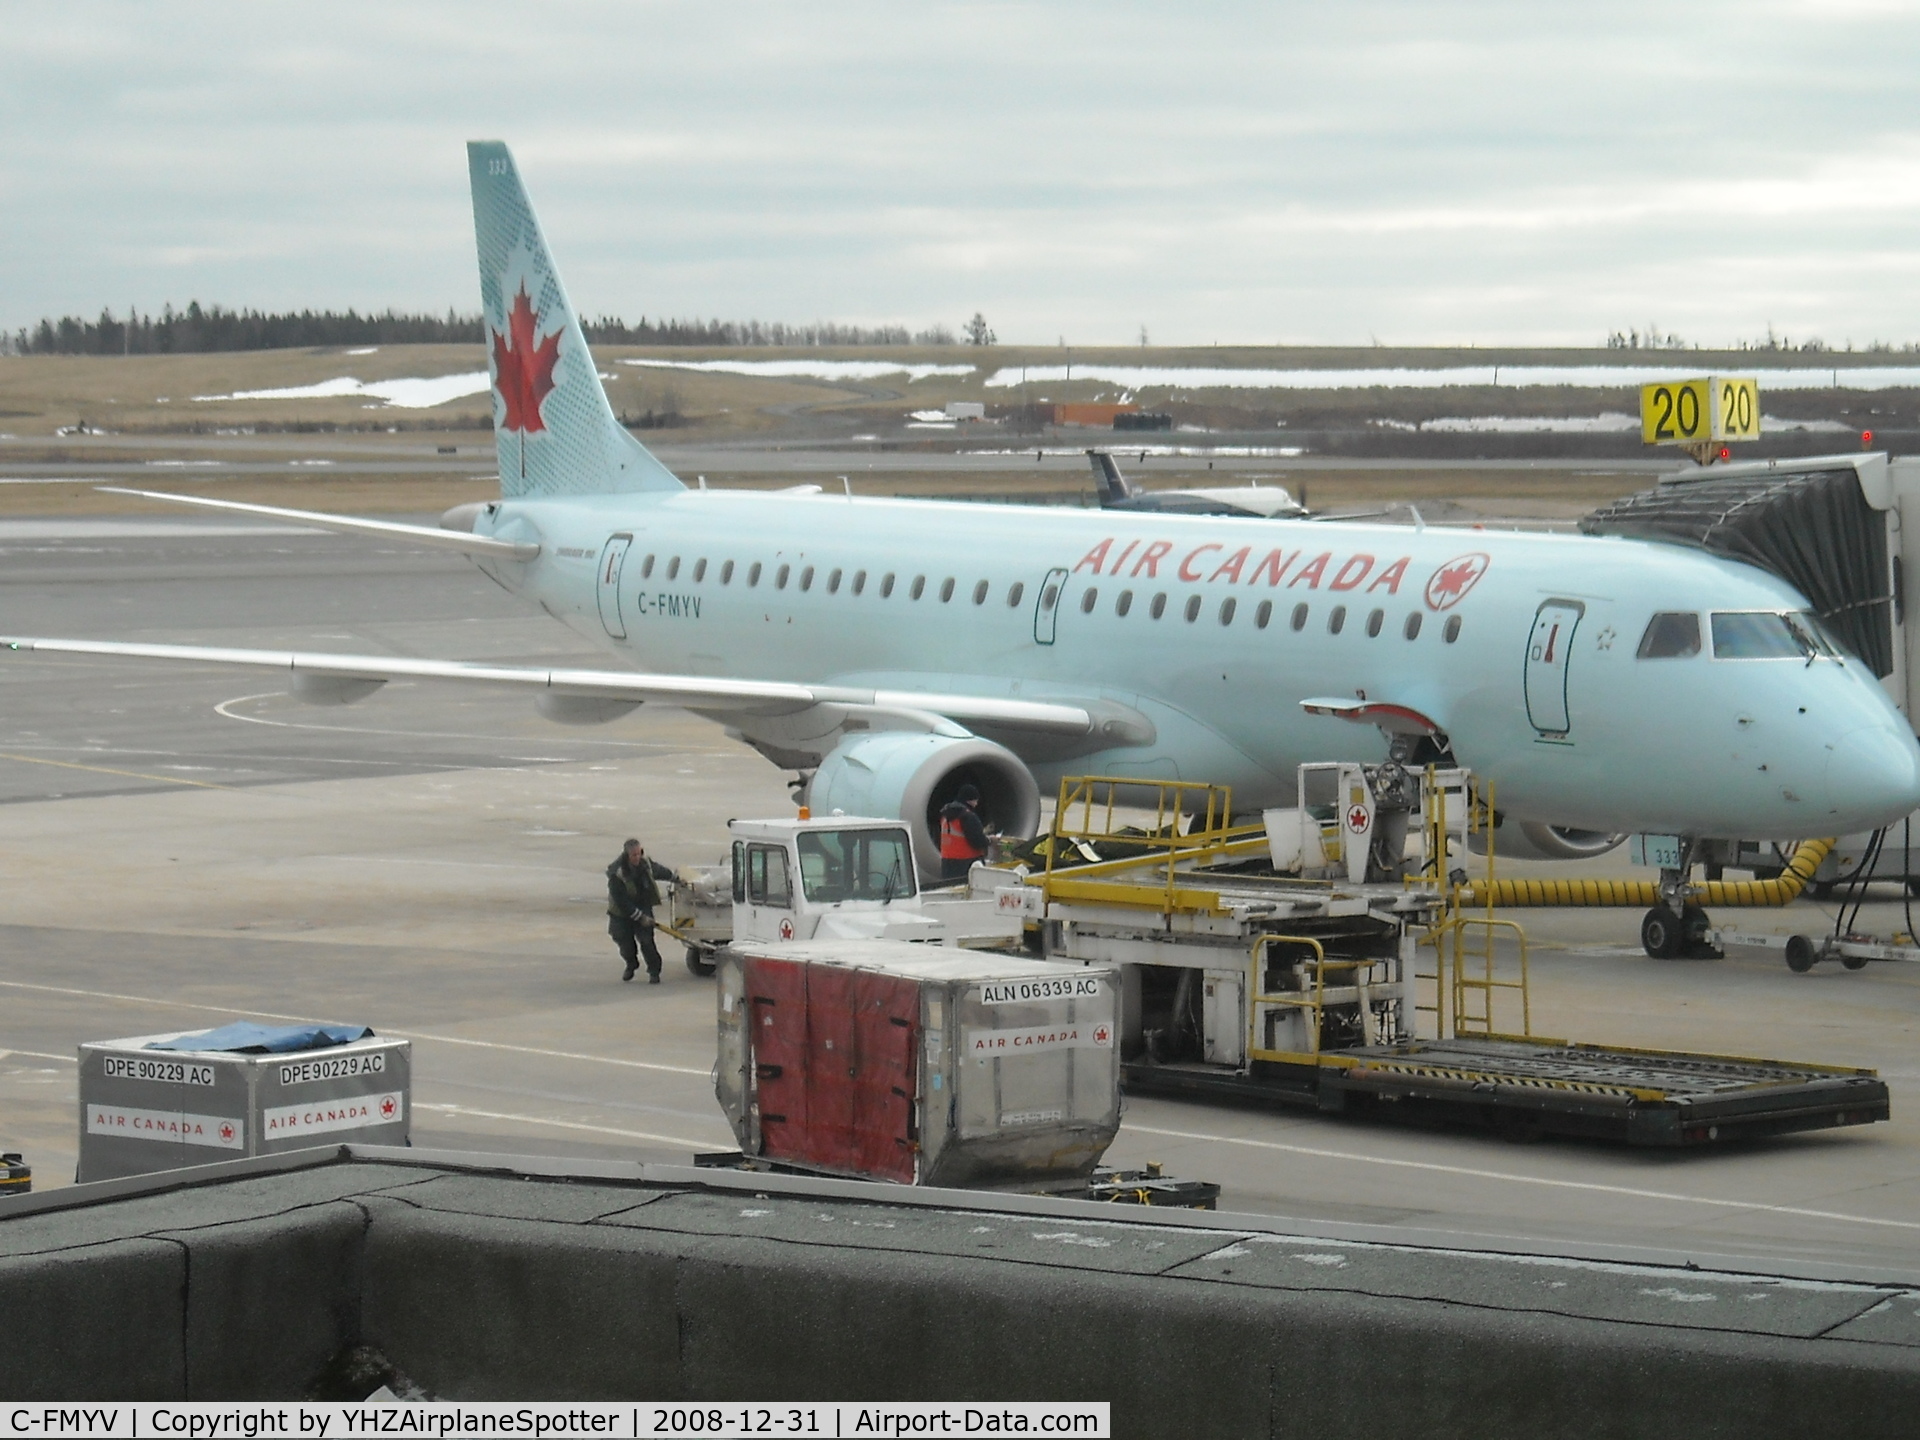 C-FMYV, 2007 Embraer 190AR (ERJ-190-100IGW) C/N 19000108, Sitting at Gate 20 at YHZ, with aircraft C-GKGA in the background